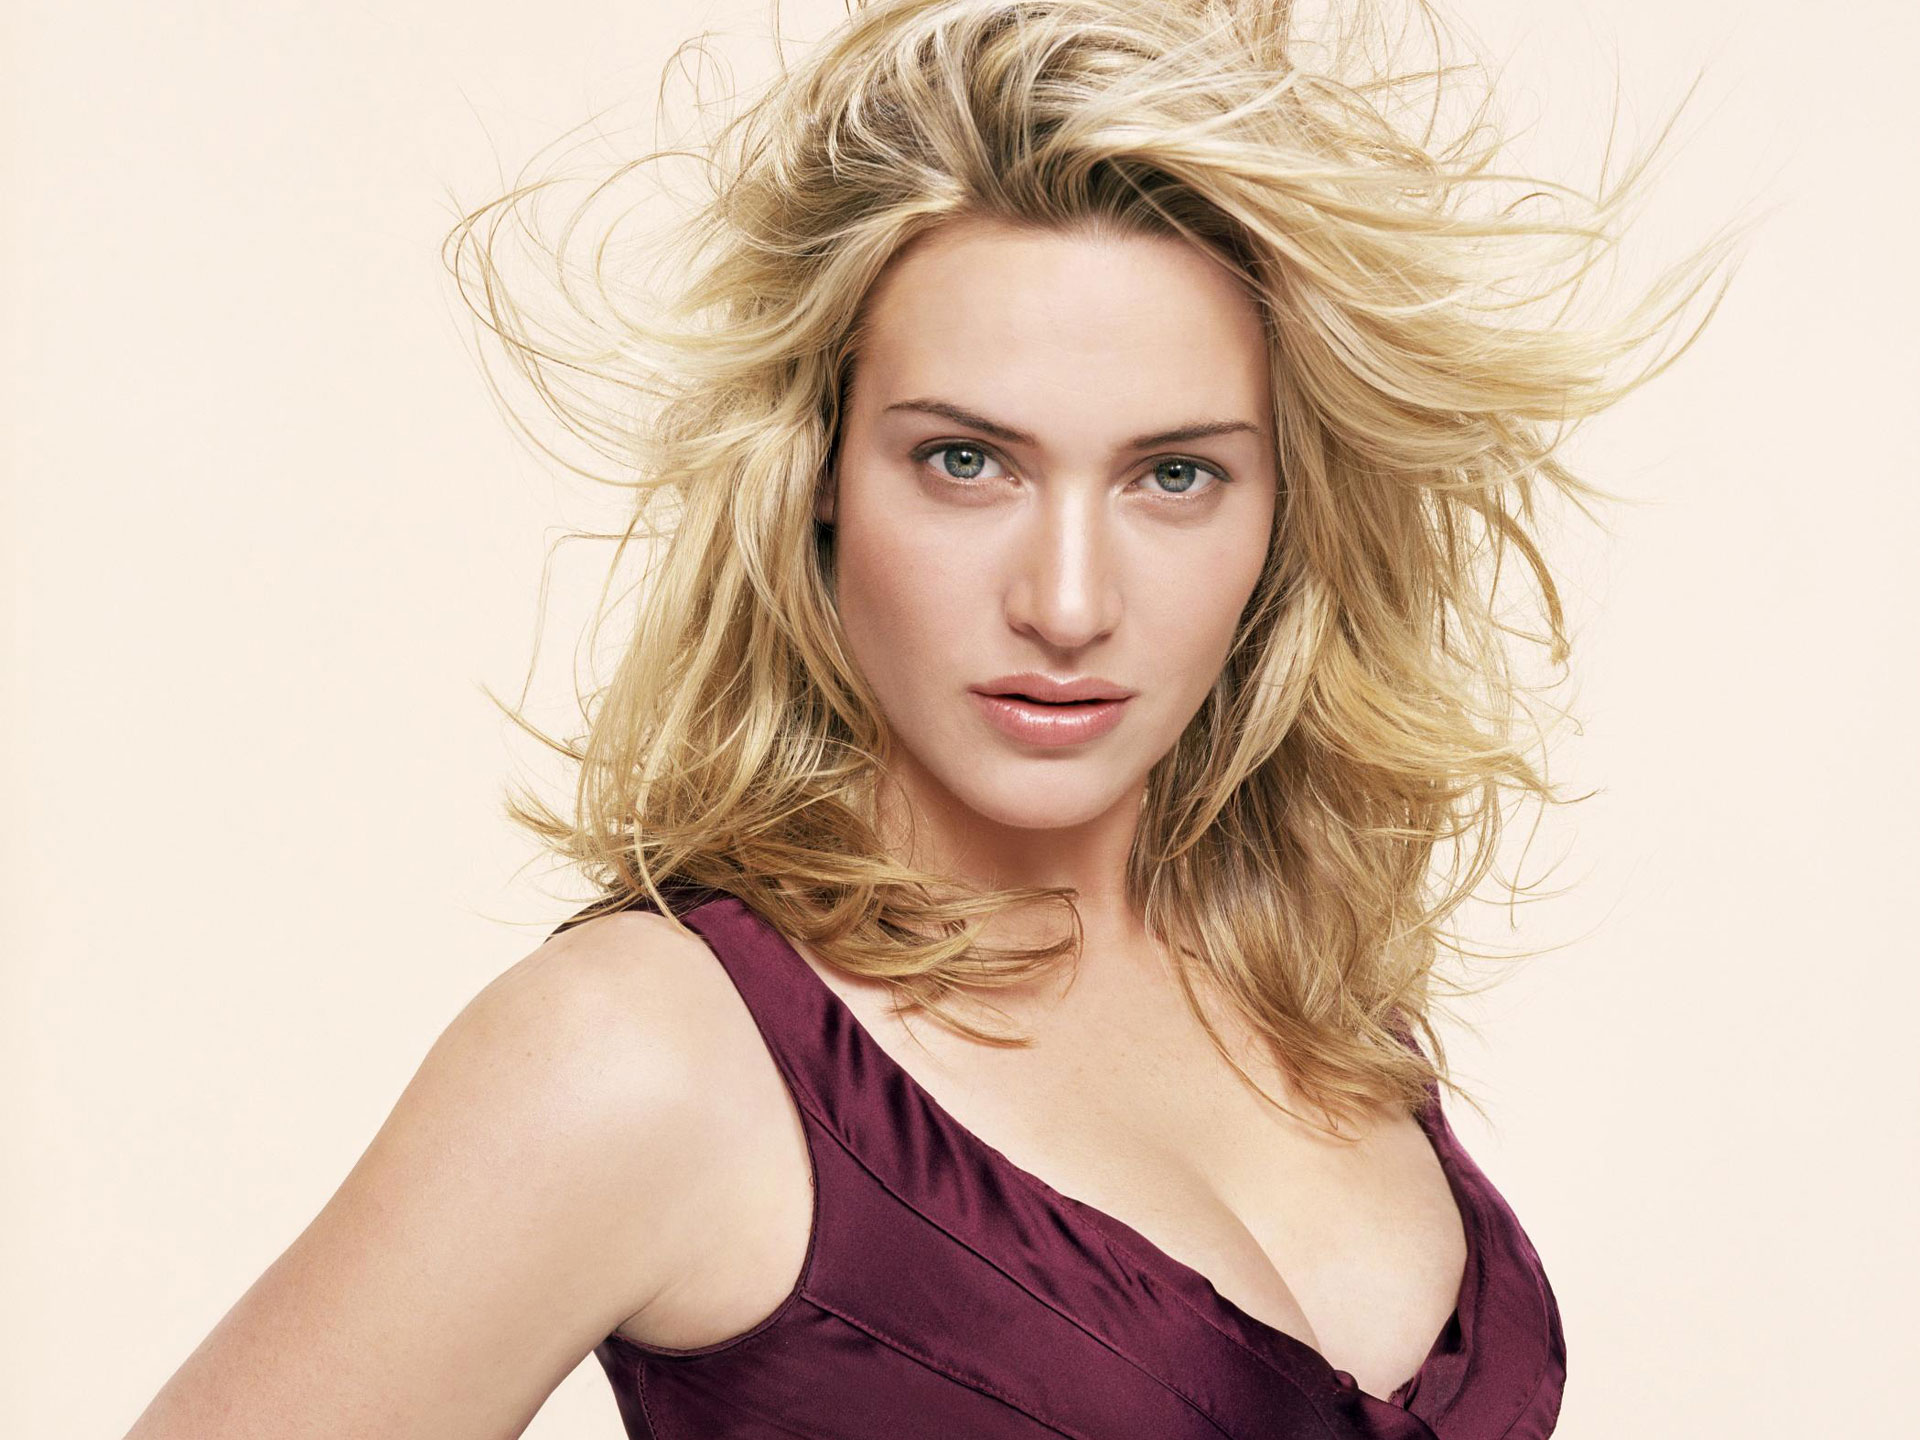 Kate Winslet Backless Images Wallpapers